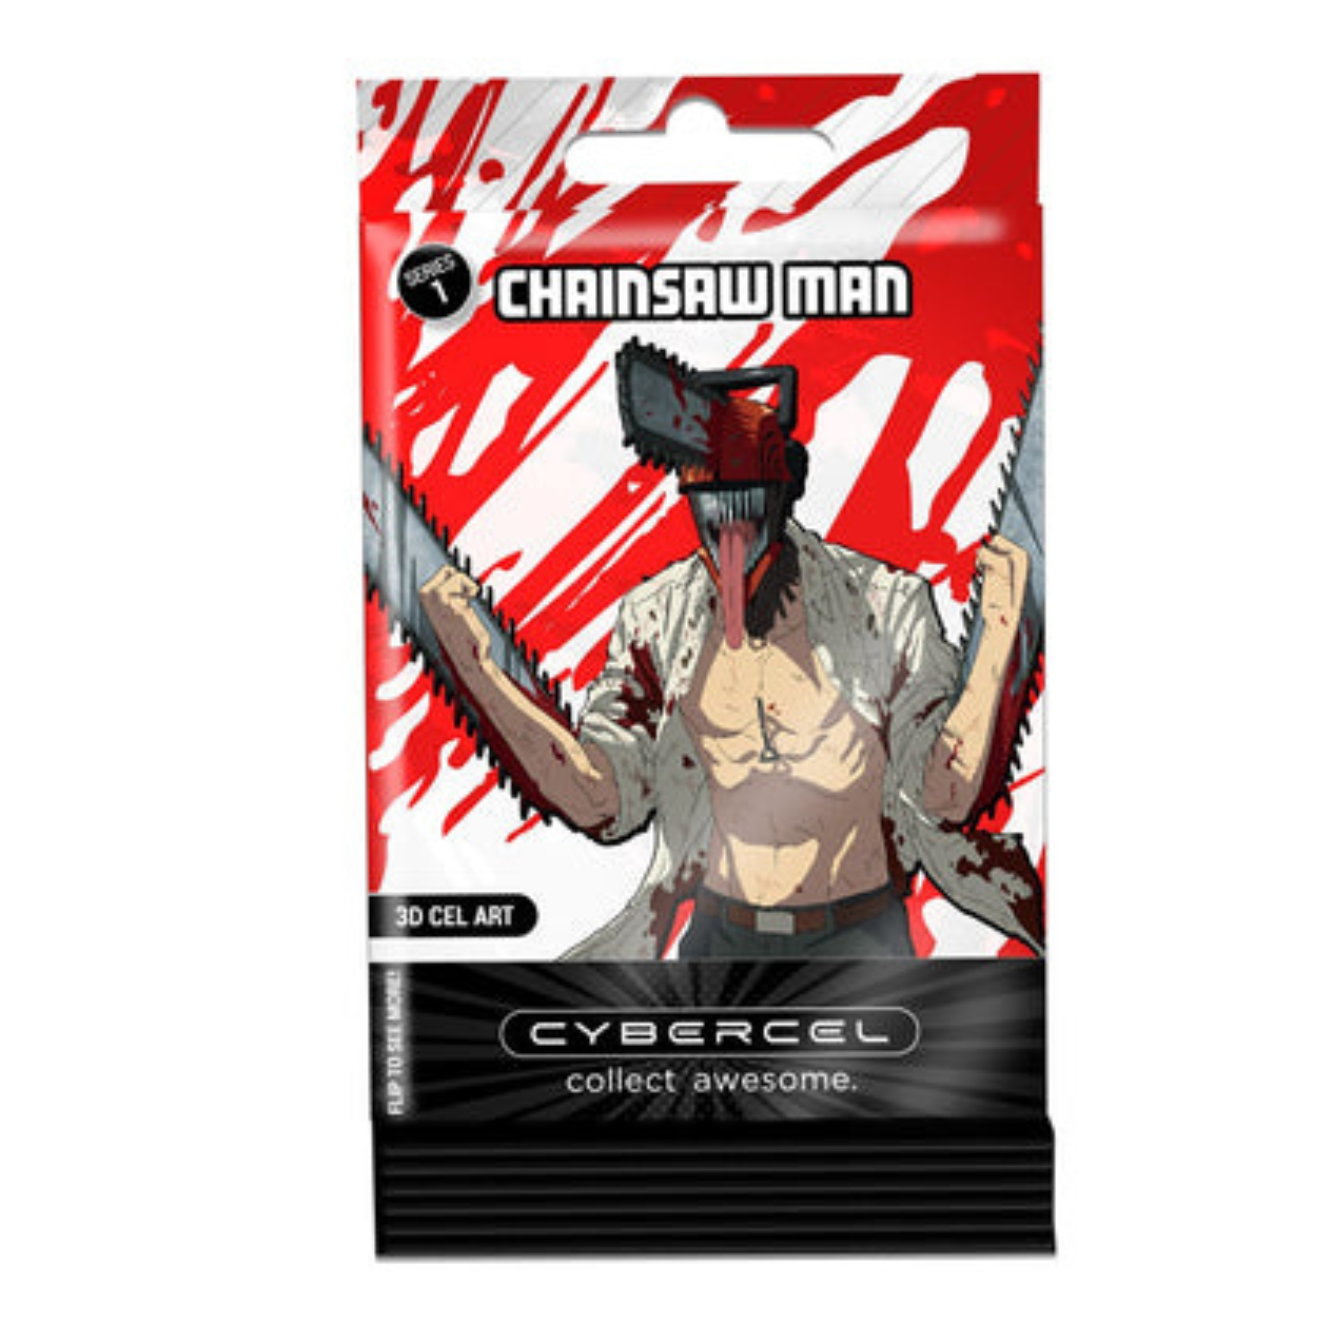 Chainsaw Man Cybercel Trading Cards